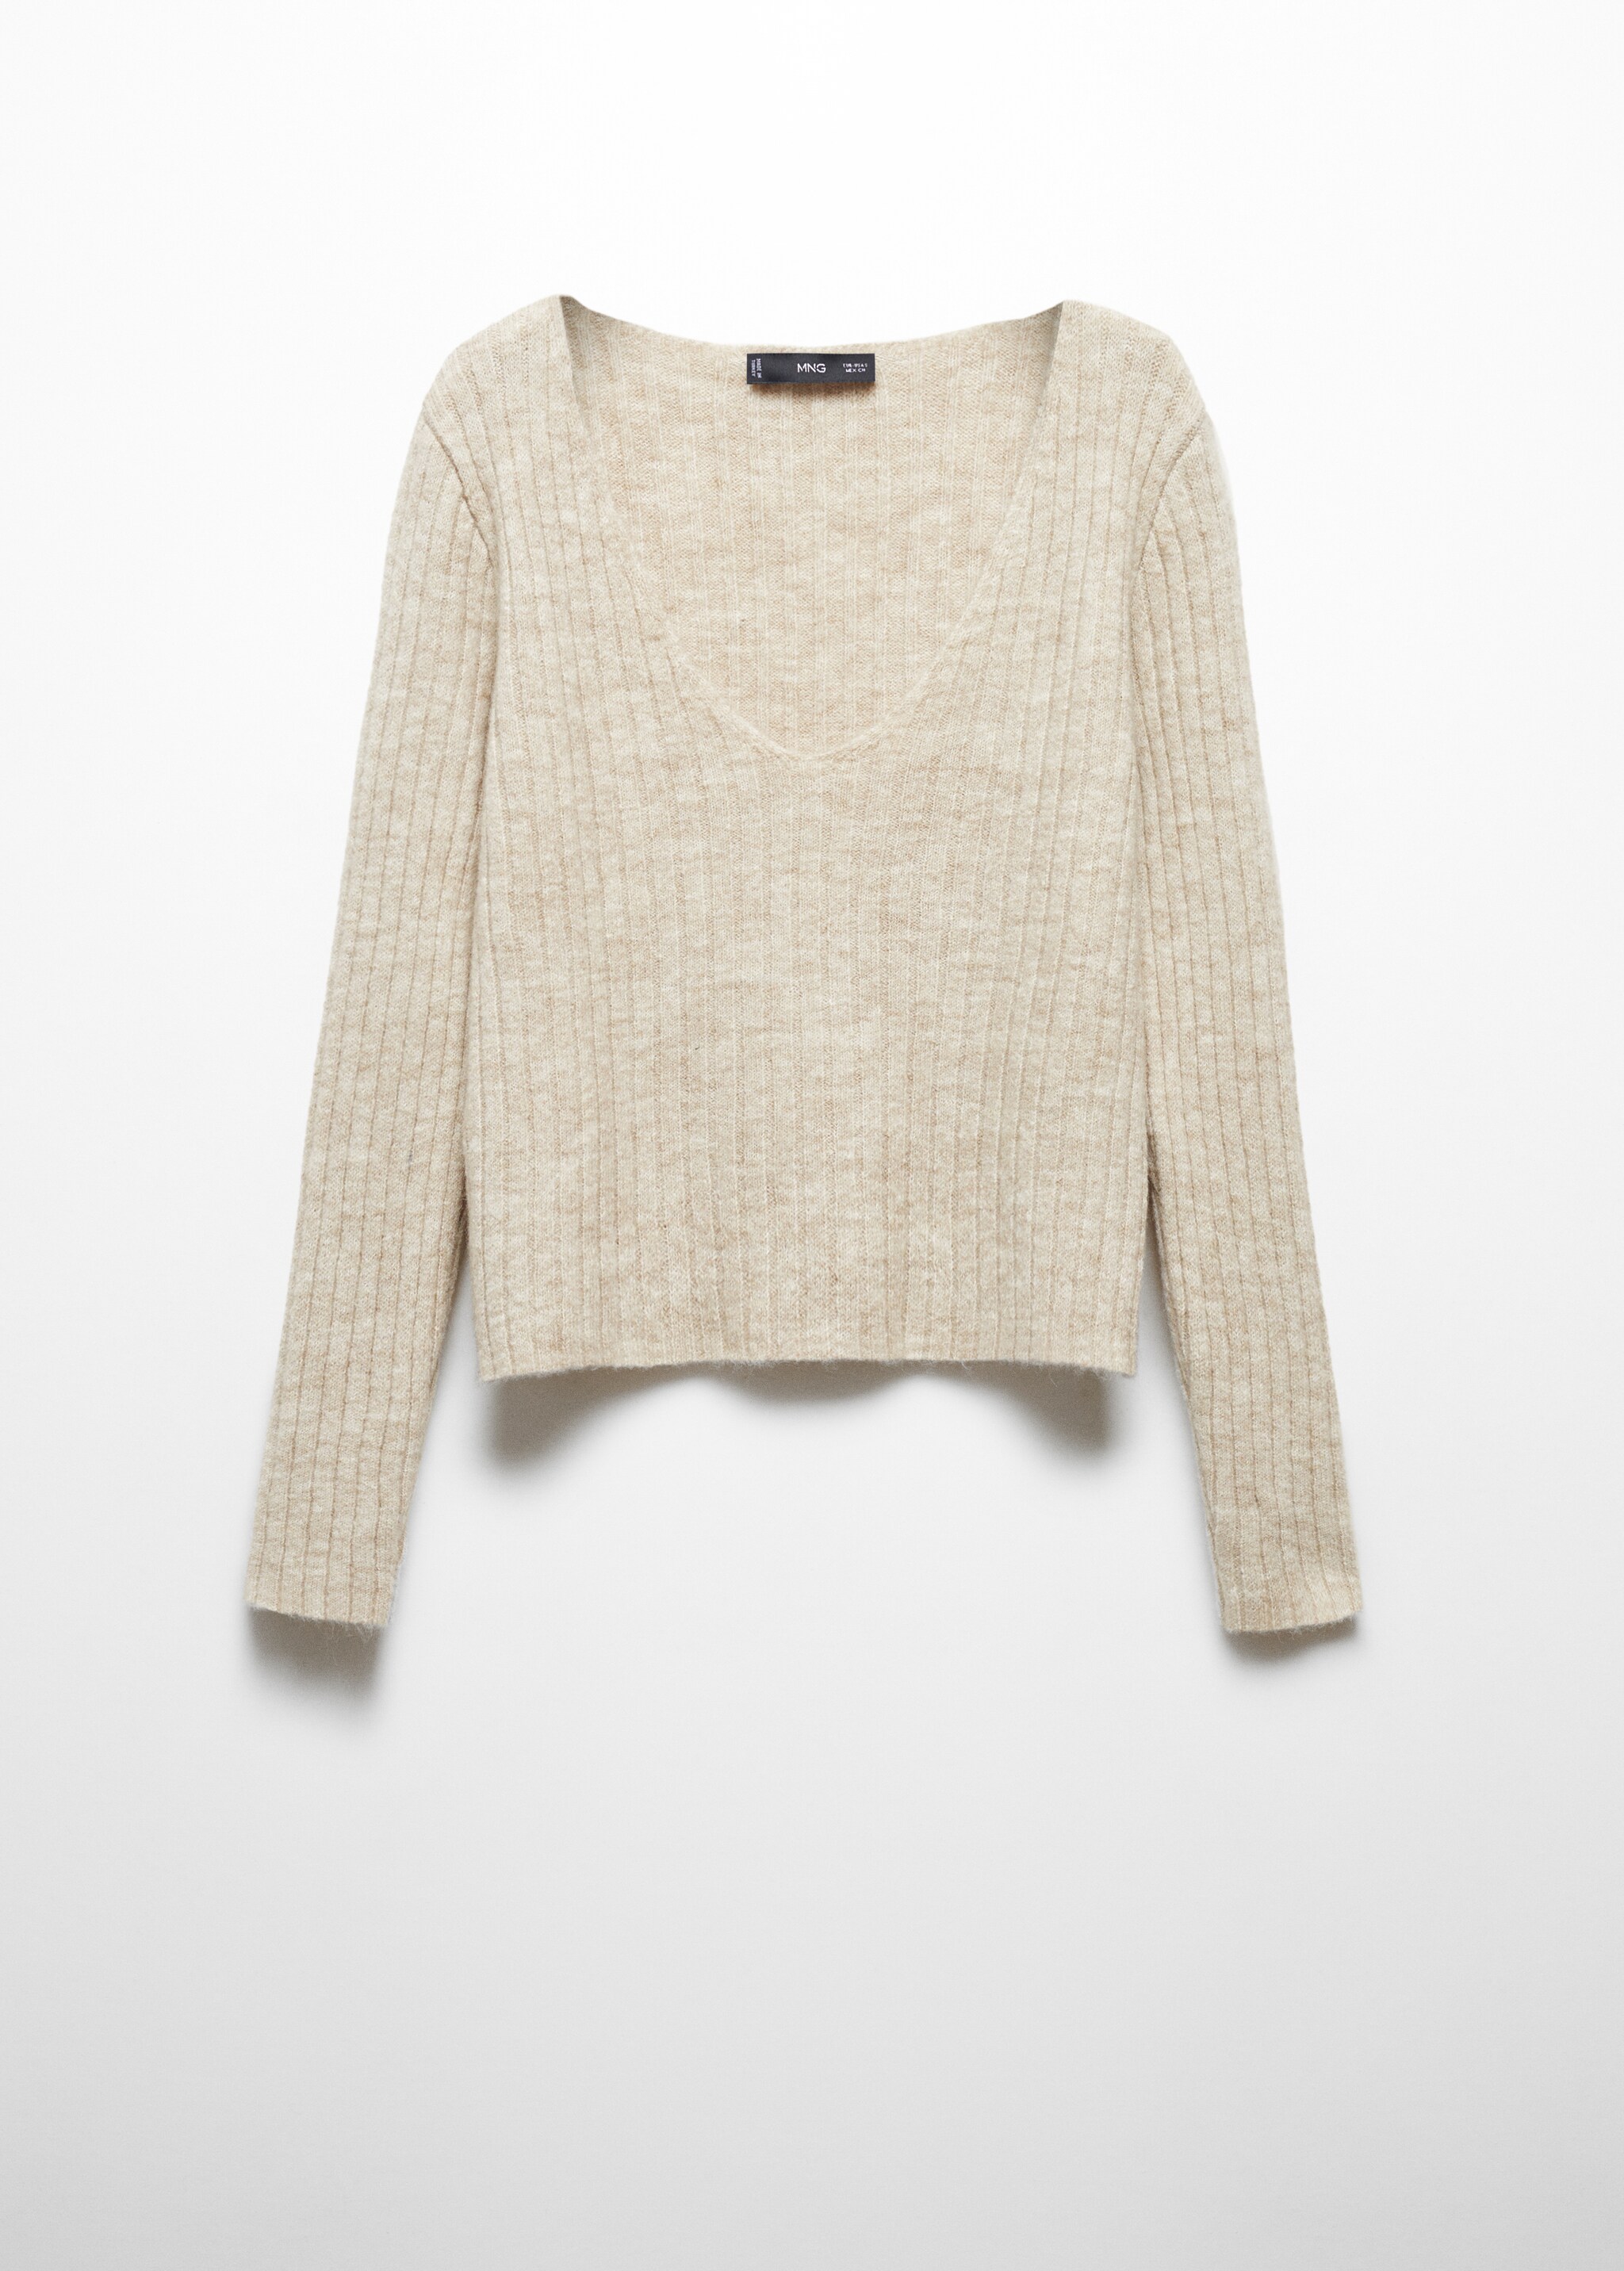 V-neck ribbed knit sweater - Article without model